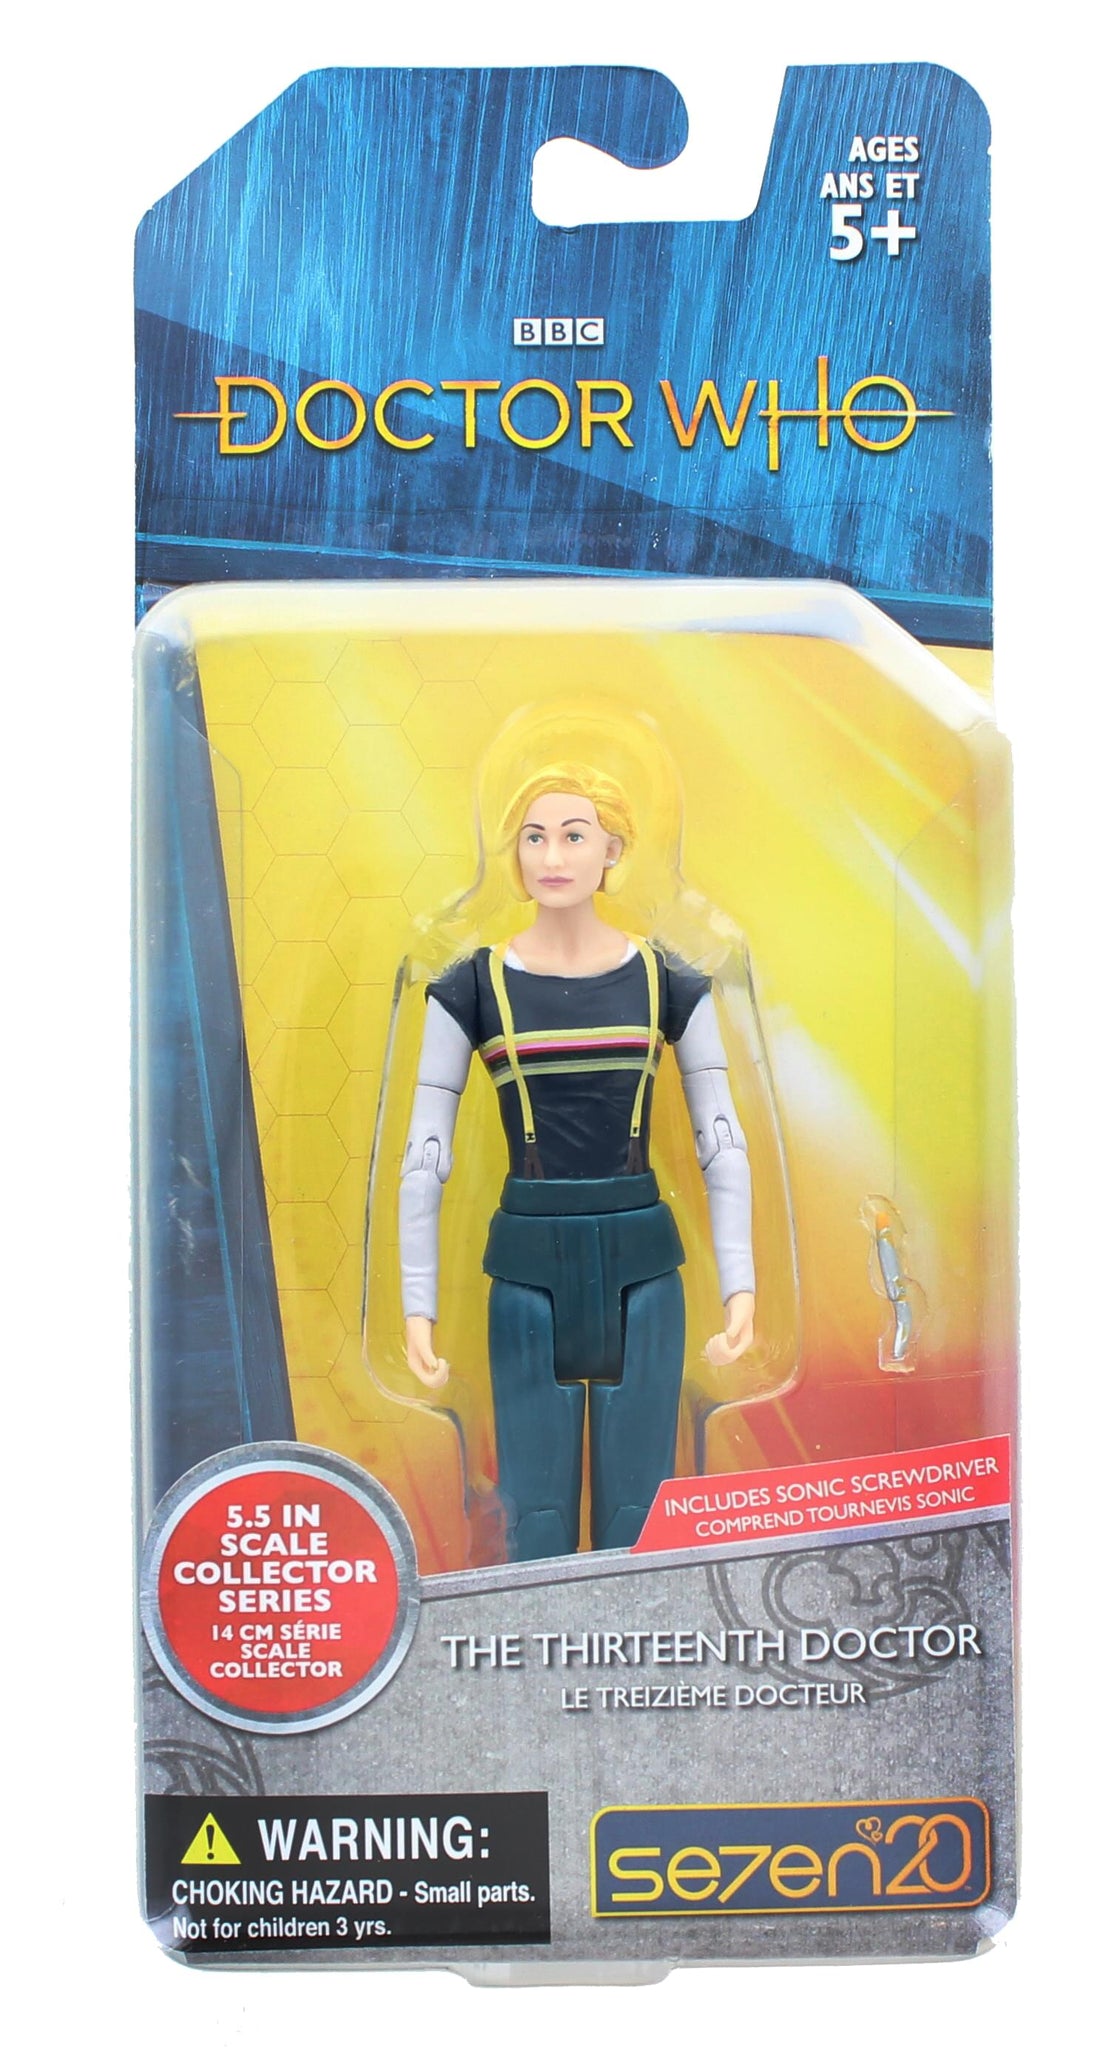 13th doctor action figure 5.5